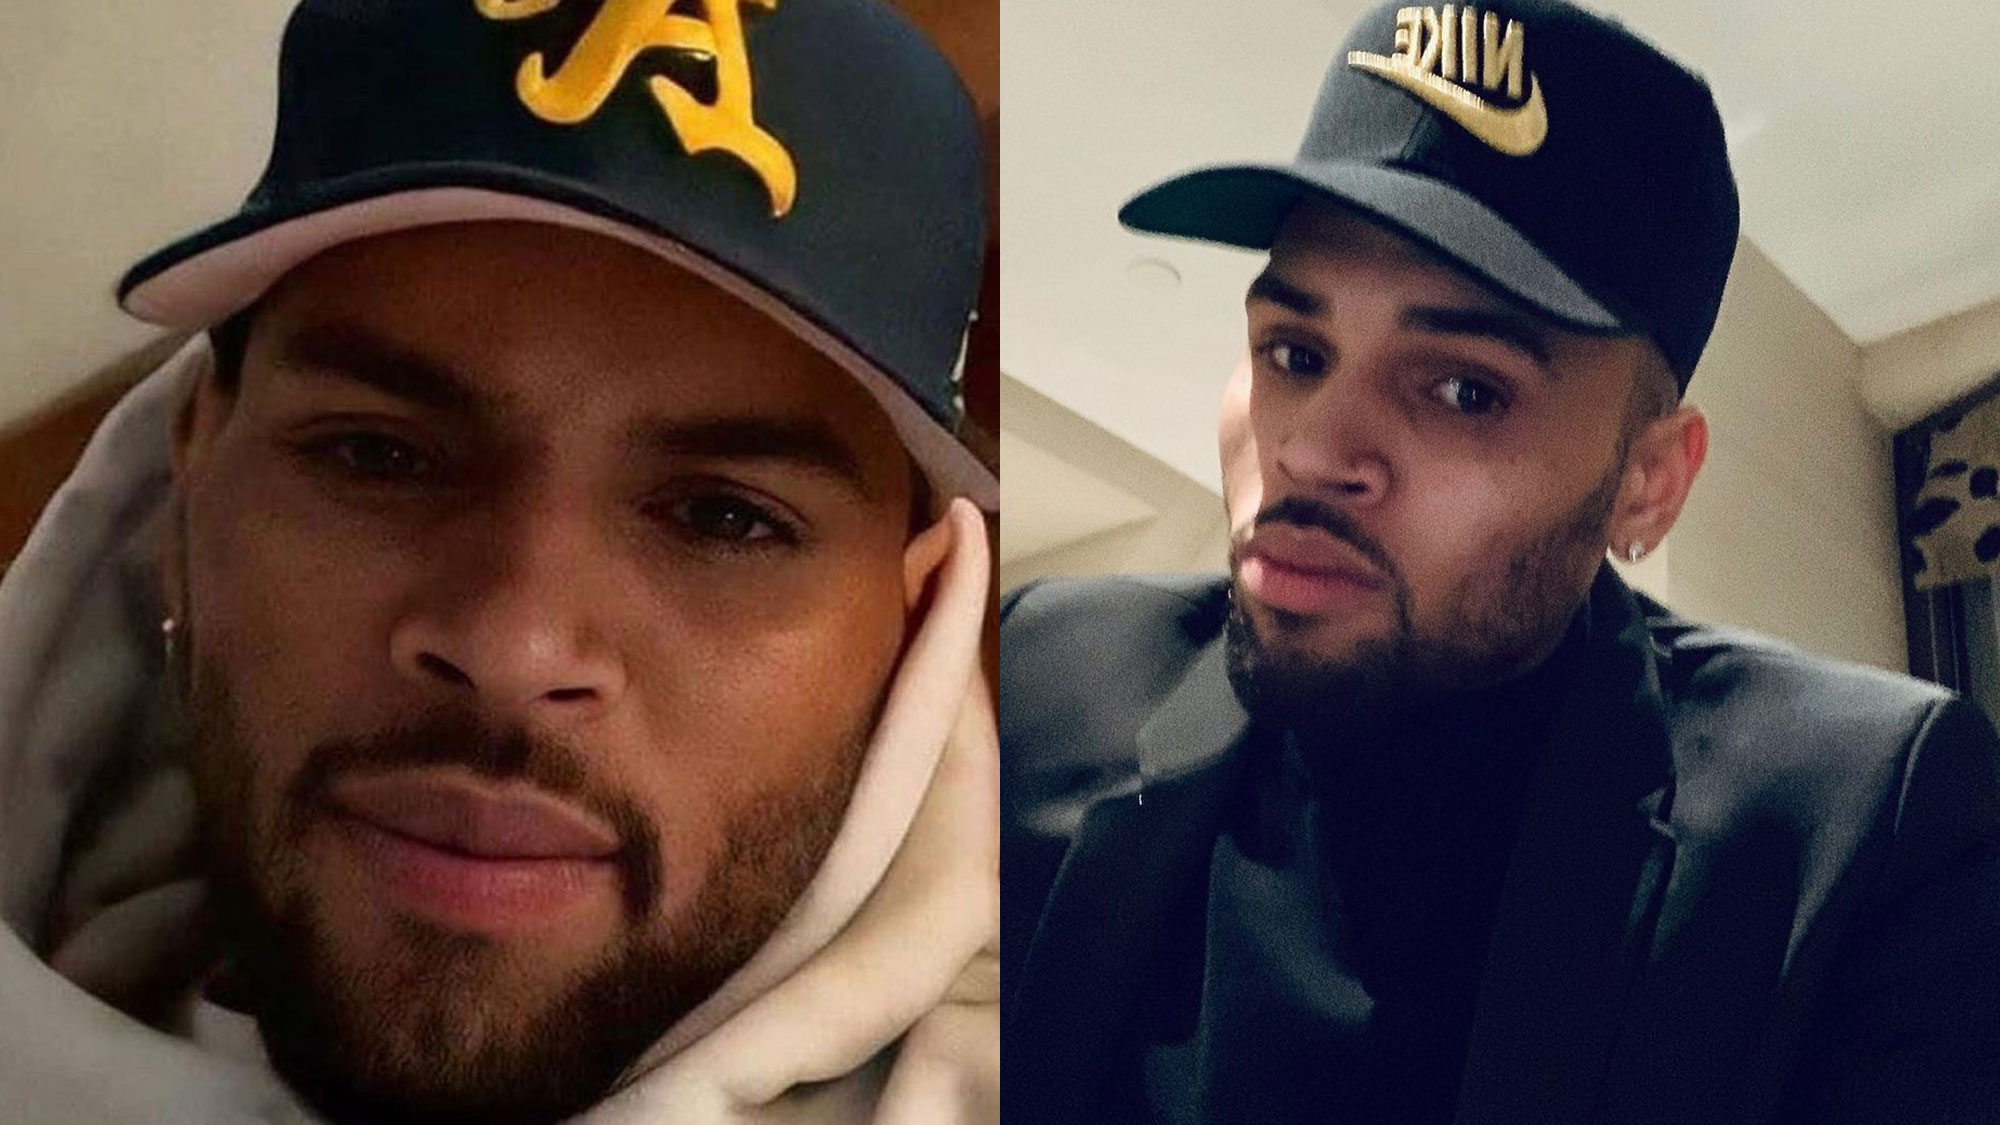 Chris Brown Porn Fucking - Chris Brown Posts His Dick On OnlyFans... But Is It Actually His Dick? -  TheSword.com